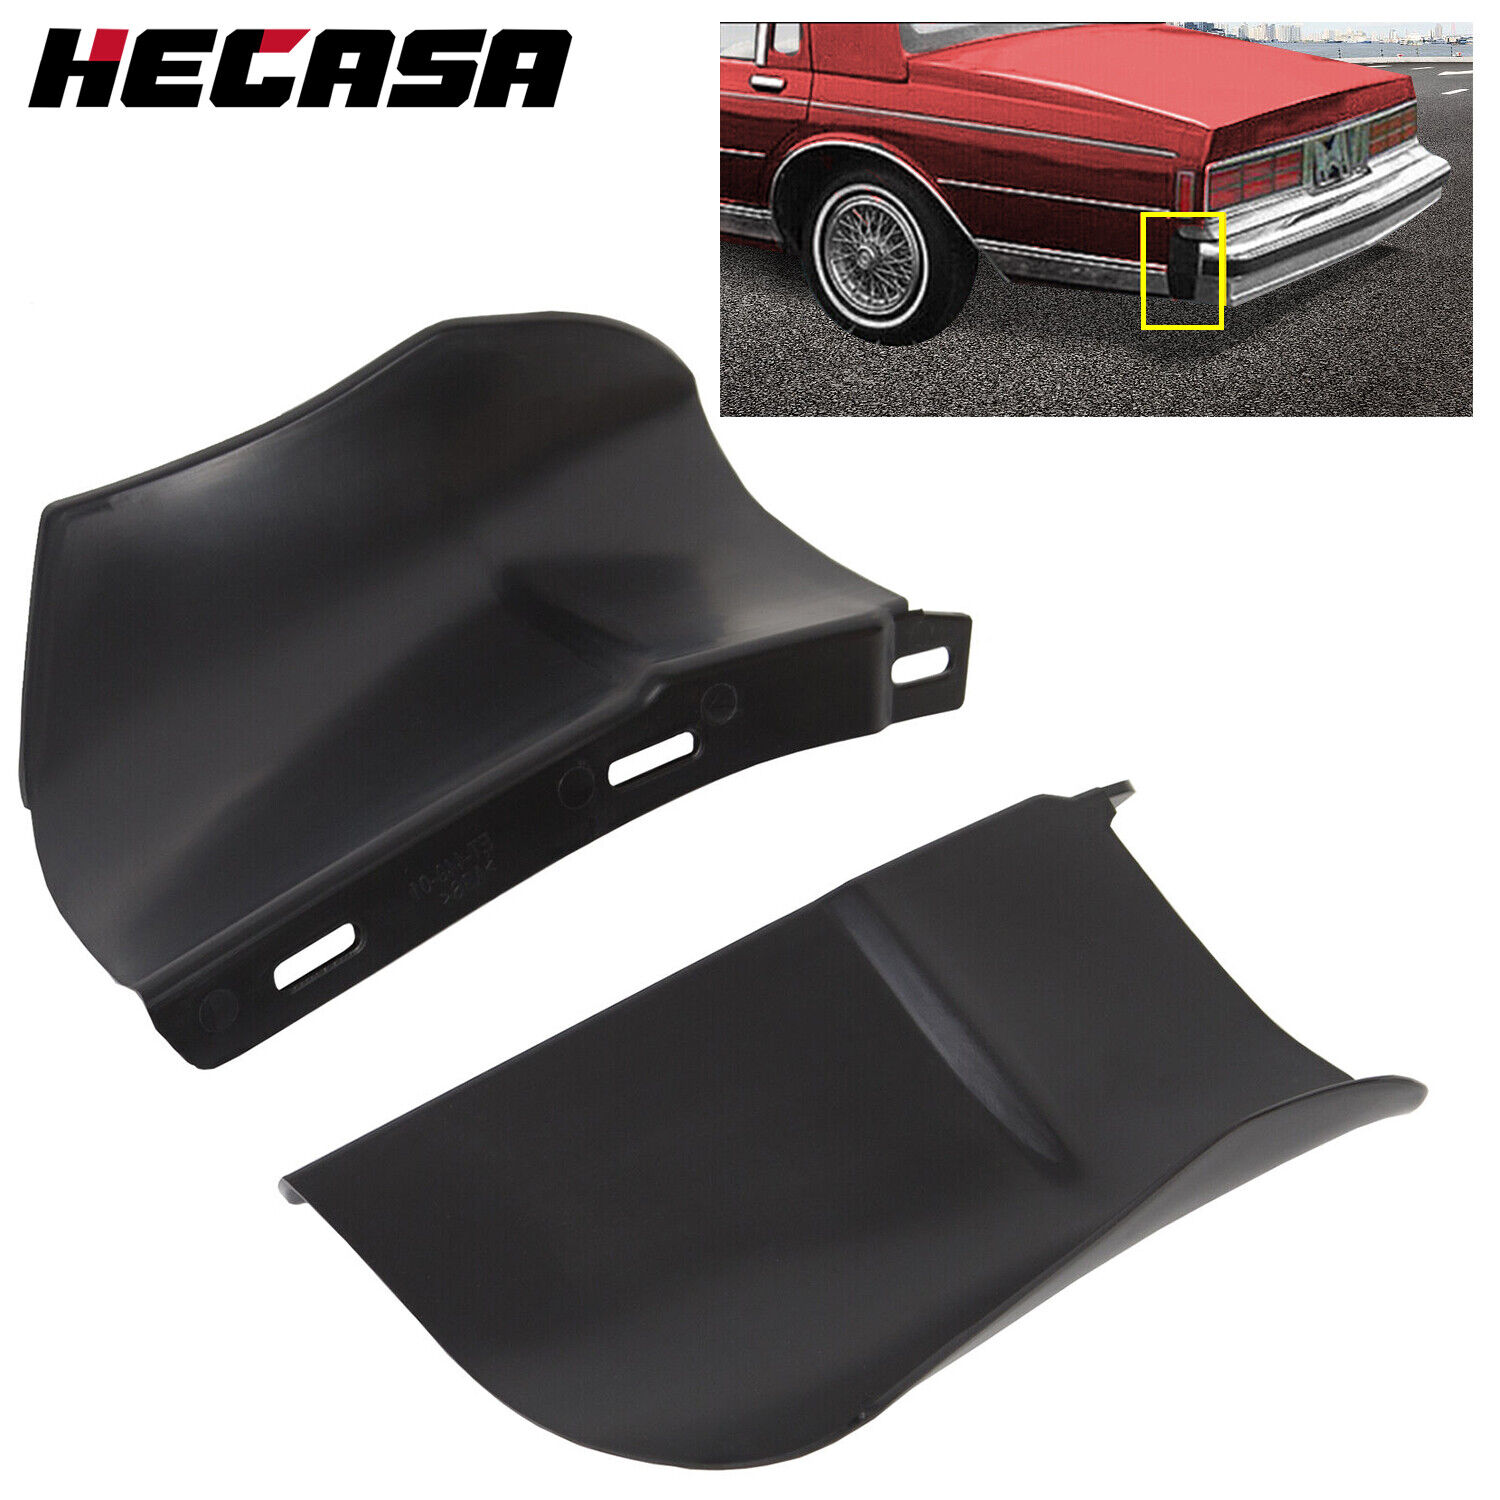 Bumper Fillers Rear Fillers Trim Black Fit For 1986-1990 Chevy Caprice Impala